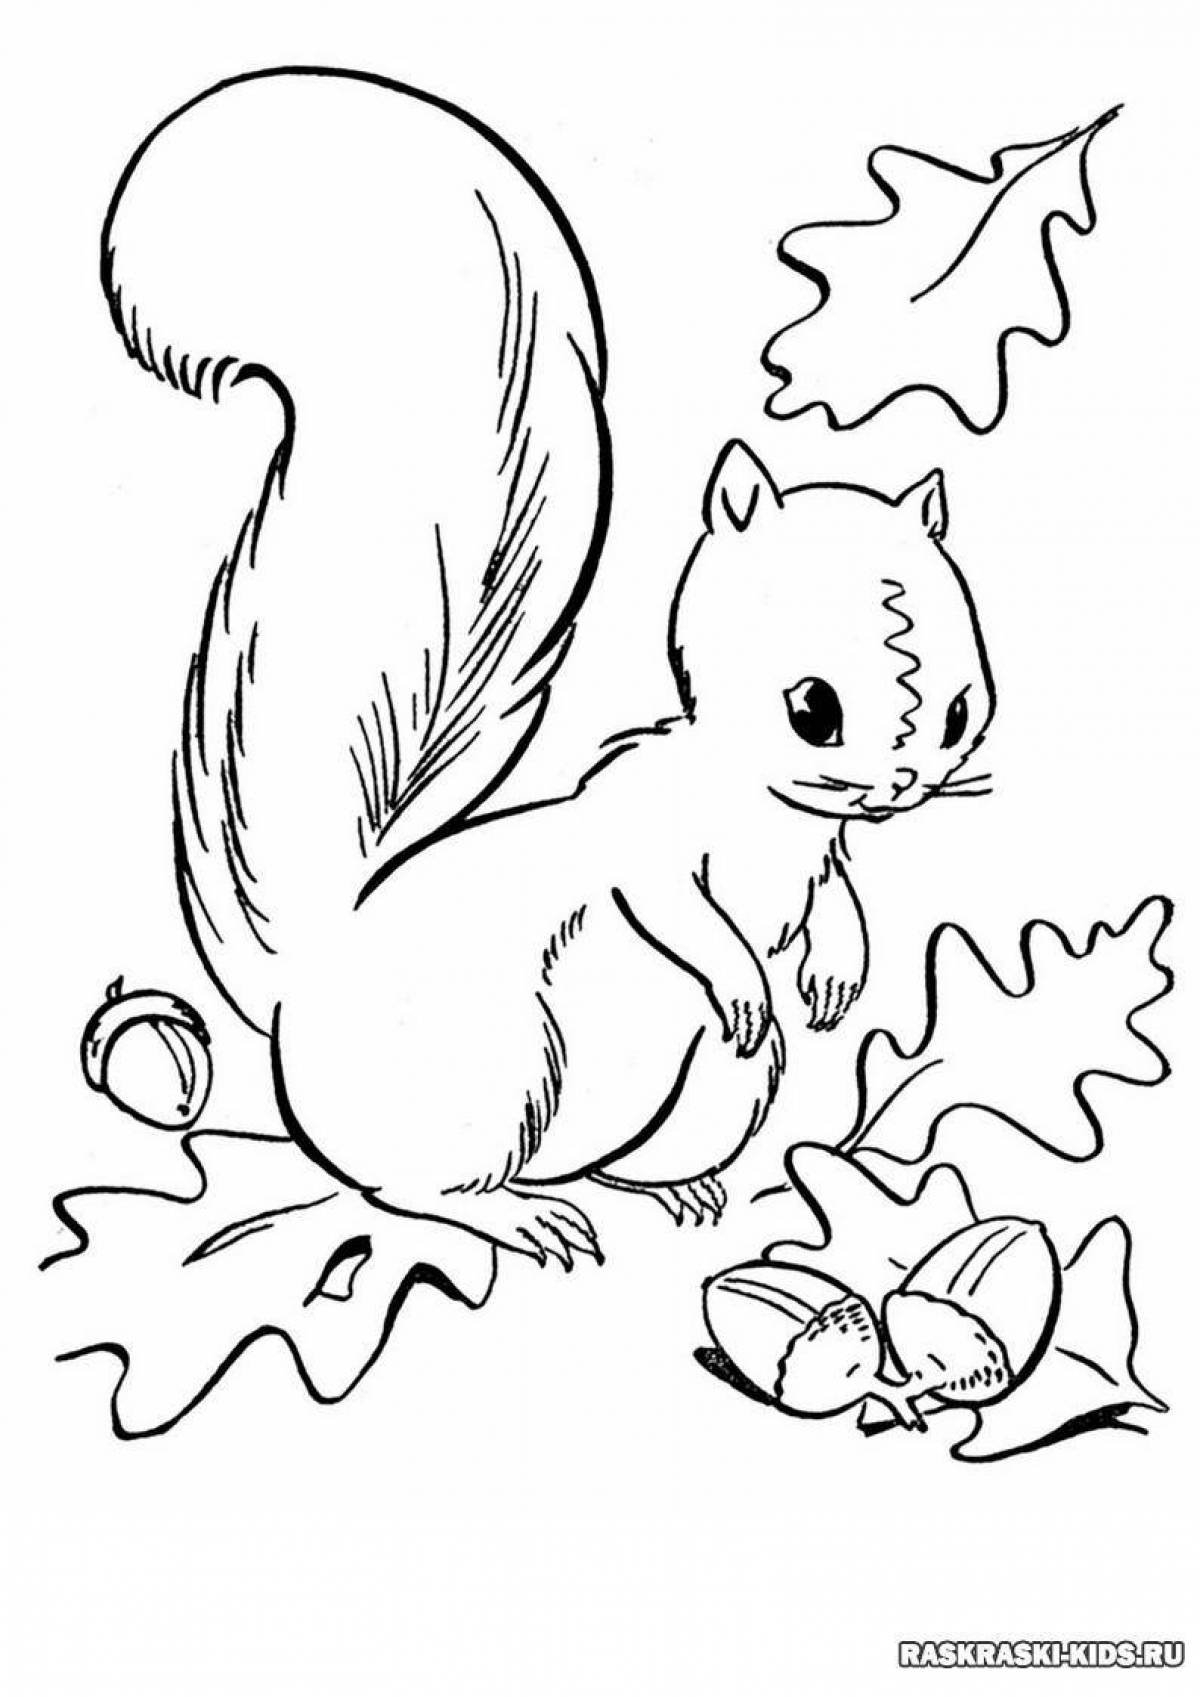 Squirrel for children 3 4 years old #1